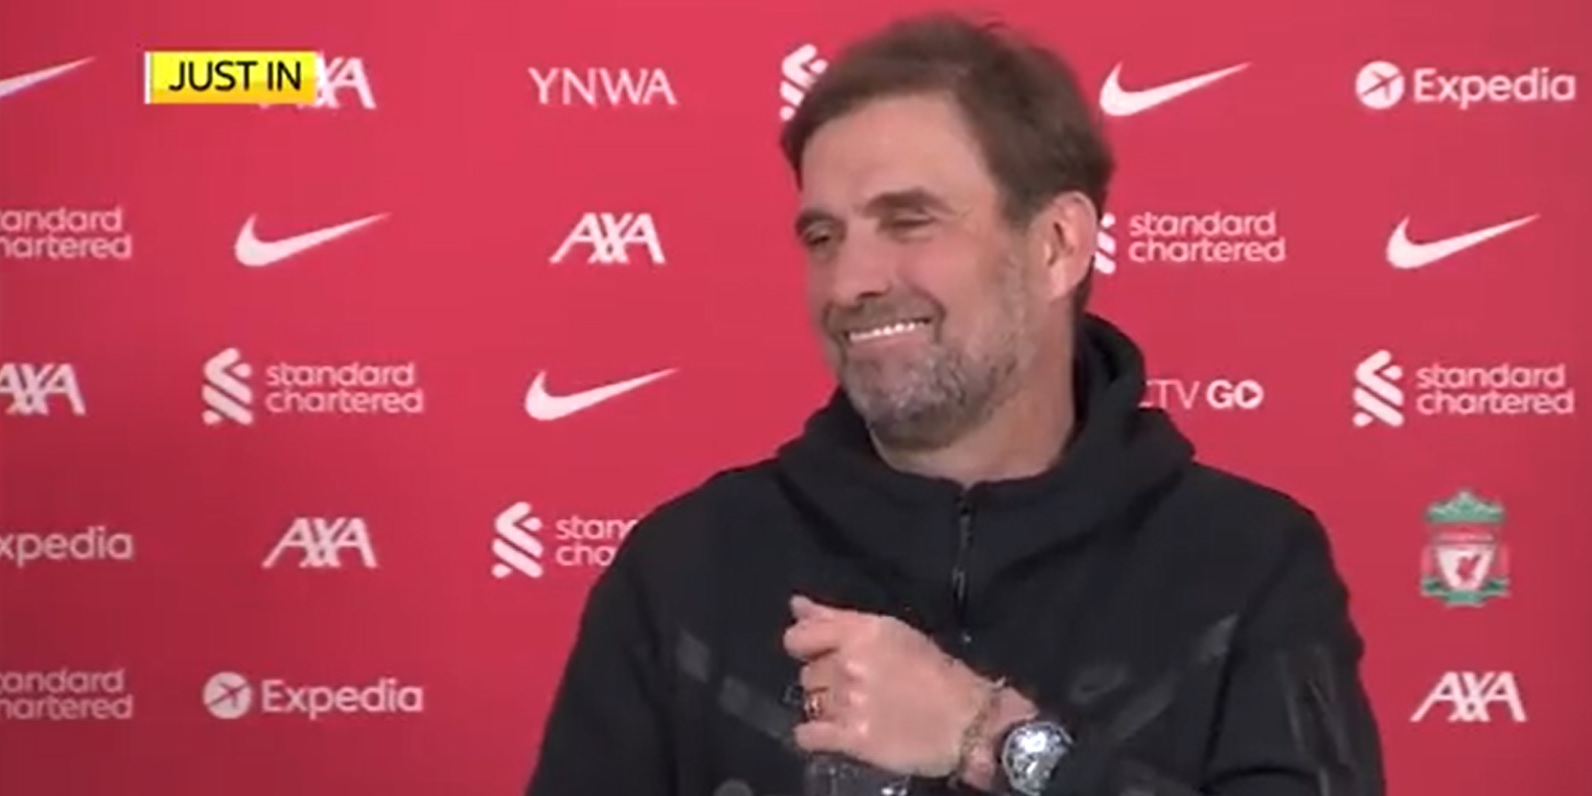 (Video) ‘That would be a lie’ – Klopp savages one reporter to hilarity of other journalists in pre-match presser